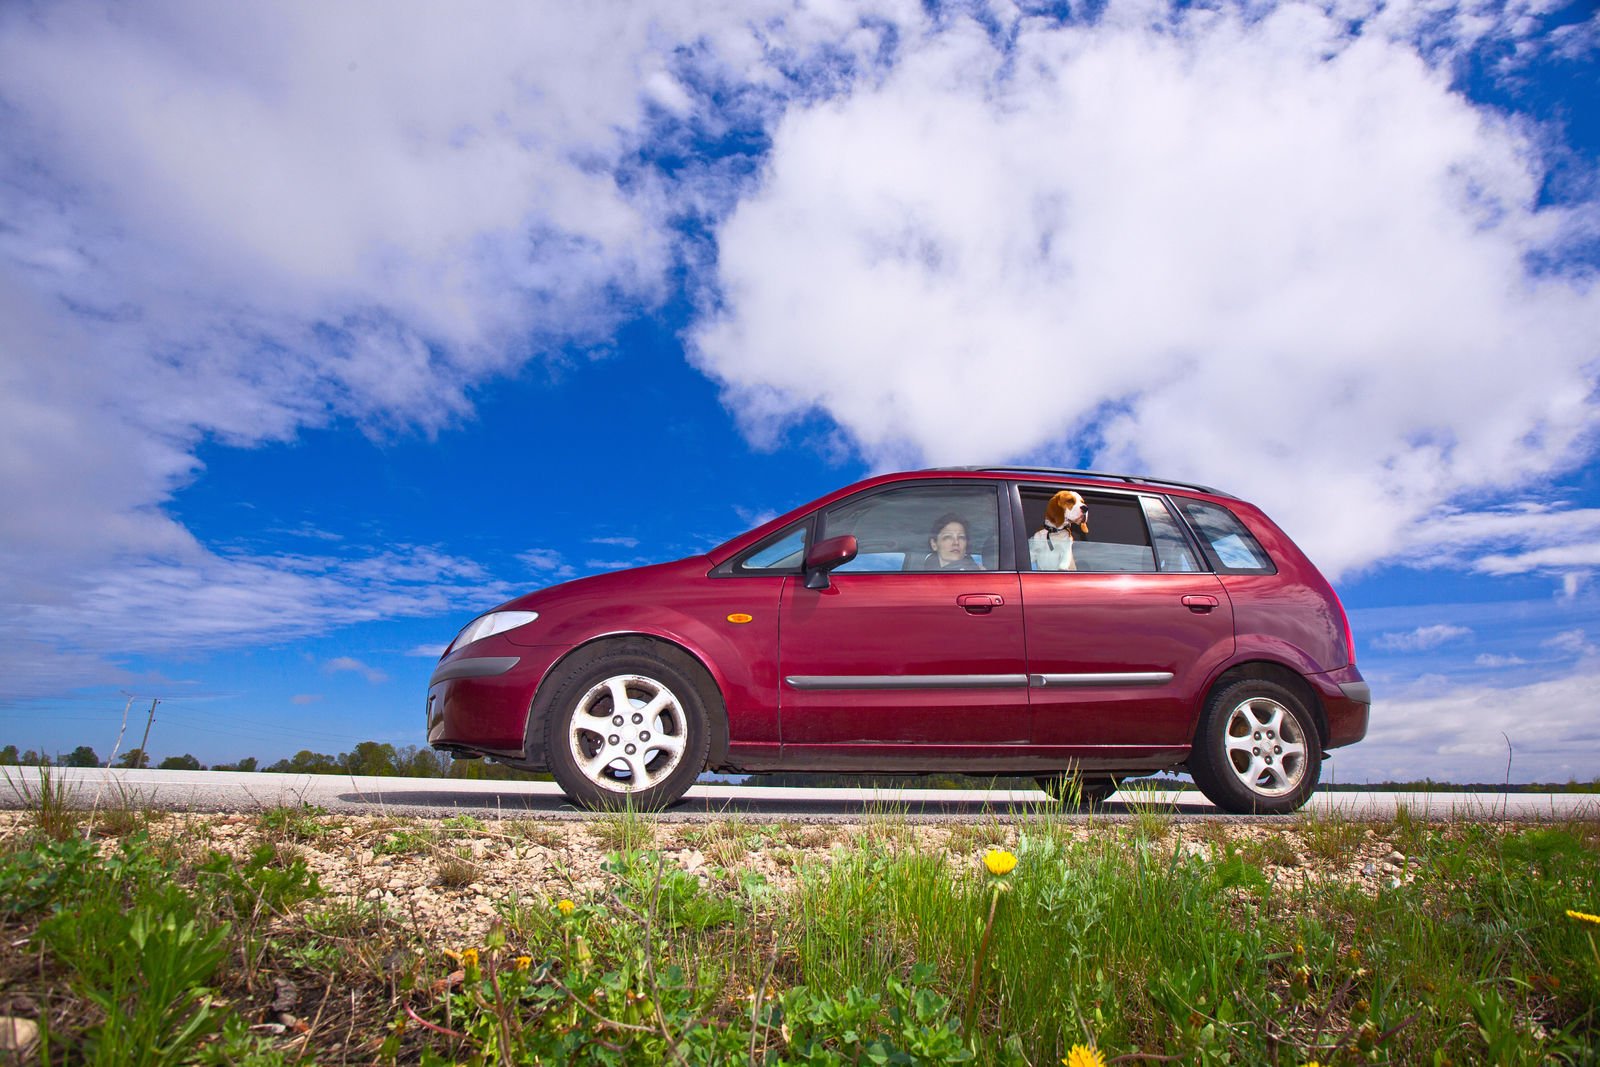 Does the price of your car affect your insurance rate?